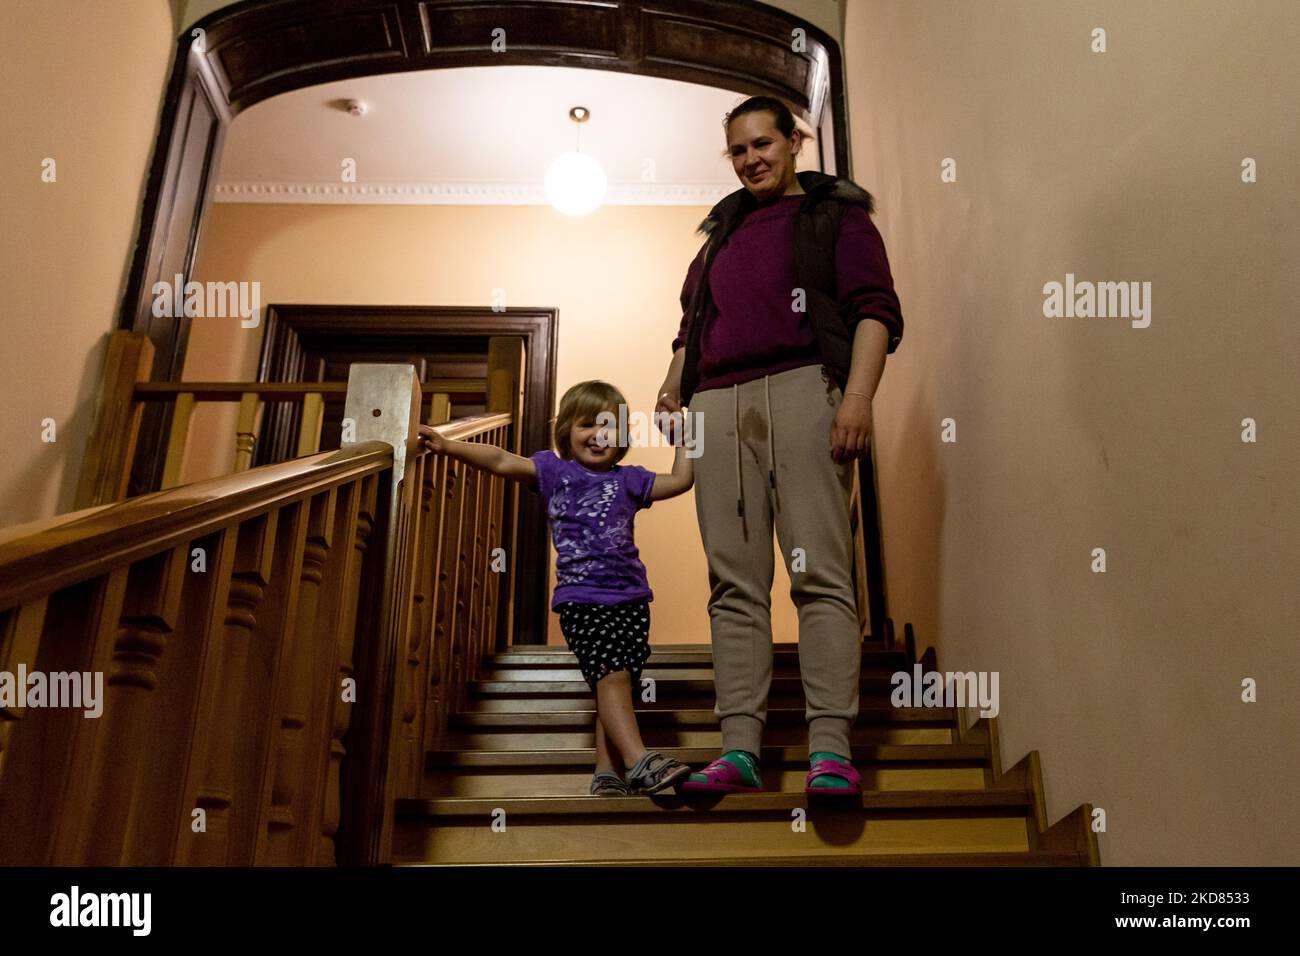 Ukrainian domestic refugees who escaped from Kharkiv area to relative safety of Nadyby, Lviv Oblast, Ukraine walk on the stairs of thier shelter on April 21, 2022. Since the Russian Federation invaded Ukraine, the conflict forced over 10 million people to flee their homes, both internally and externally. Greek-Catholic Church in Nadyby near Lviv hosts dozens of mothers with children who fled the war in eastern part of Ukraine and supports many more refugees in the area. The families found shelter in the Center for the Pastoral Care of Priests and Monks in Nadyby. (Photo by Dominika Zarzycka/Nu Stock Photo